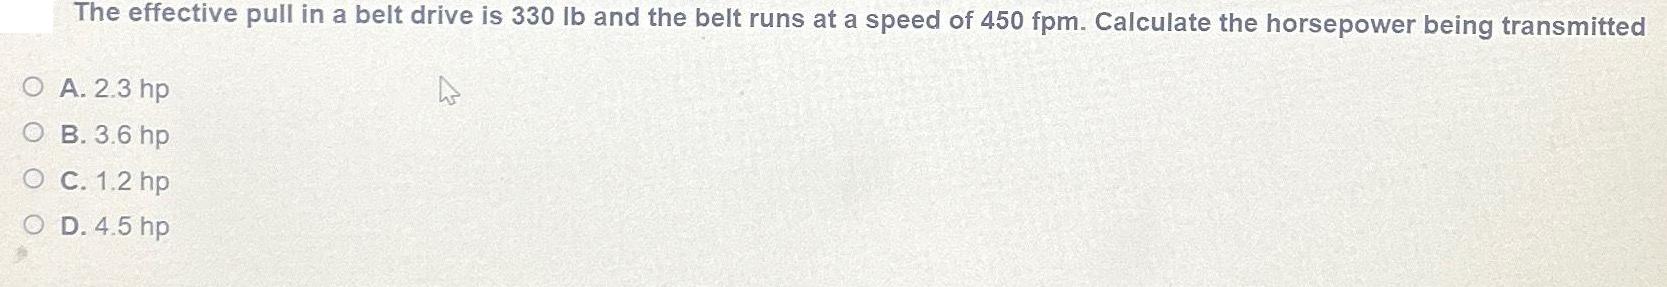 The effective pull in a belt drive is 330 lb and the belt runs at a speed of 450 fpm. Calculate the